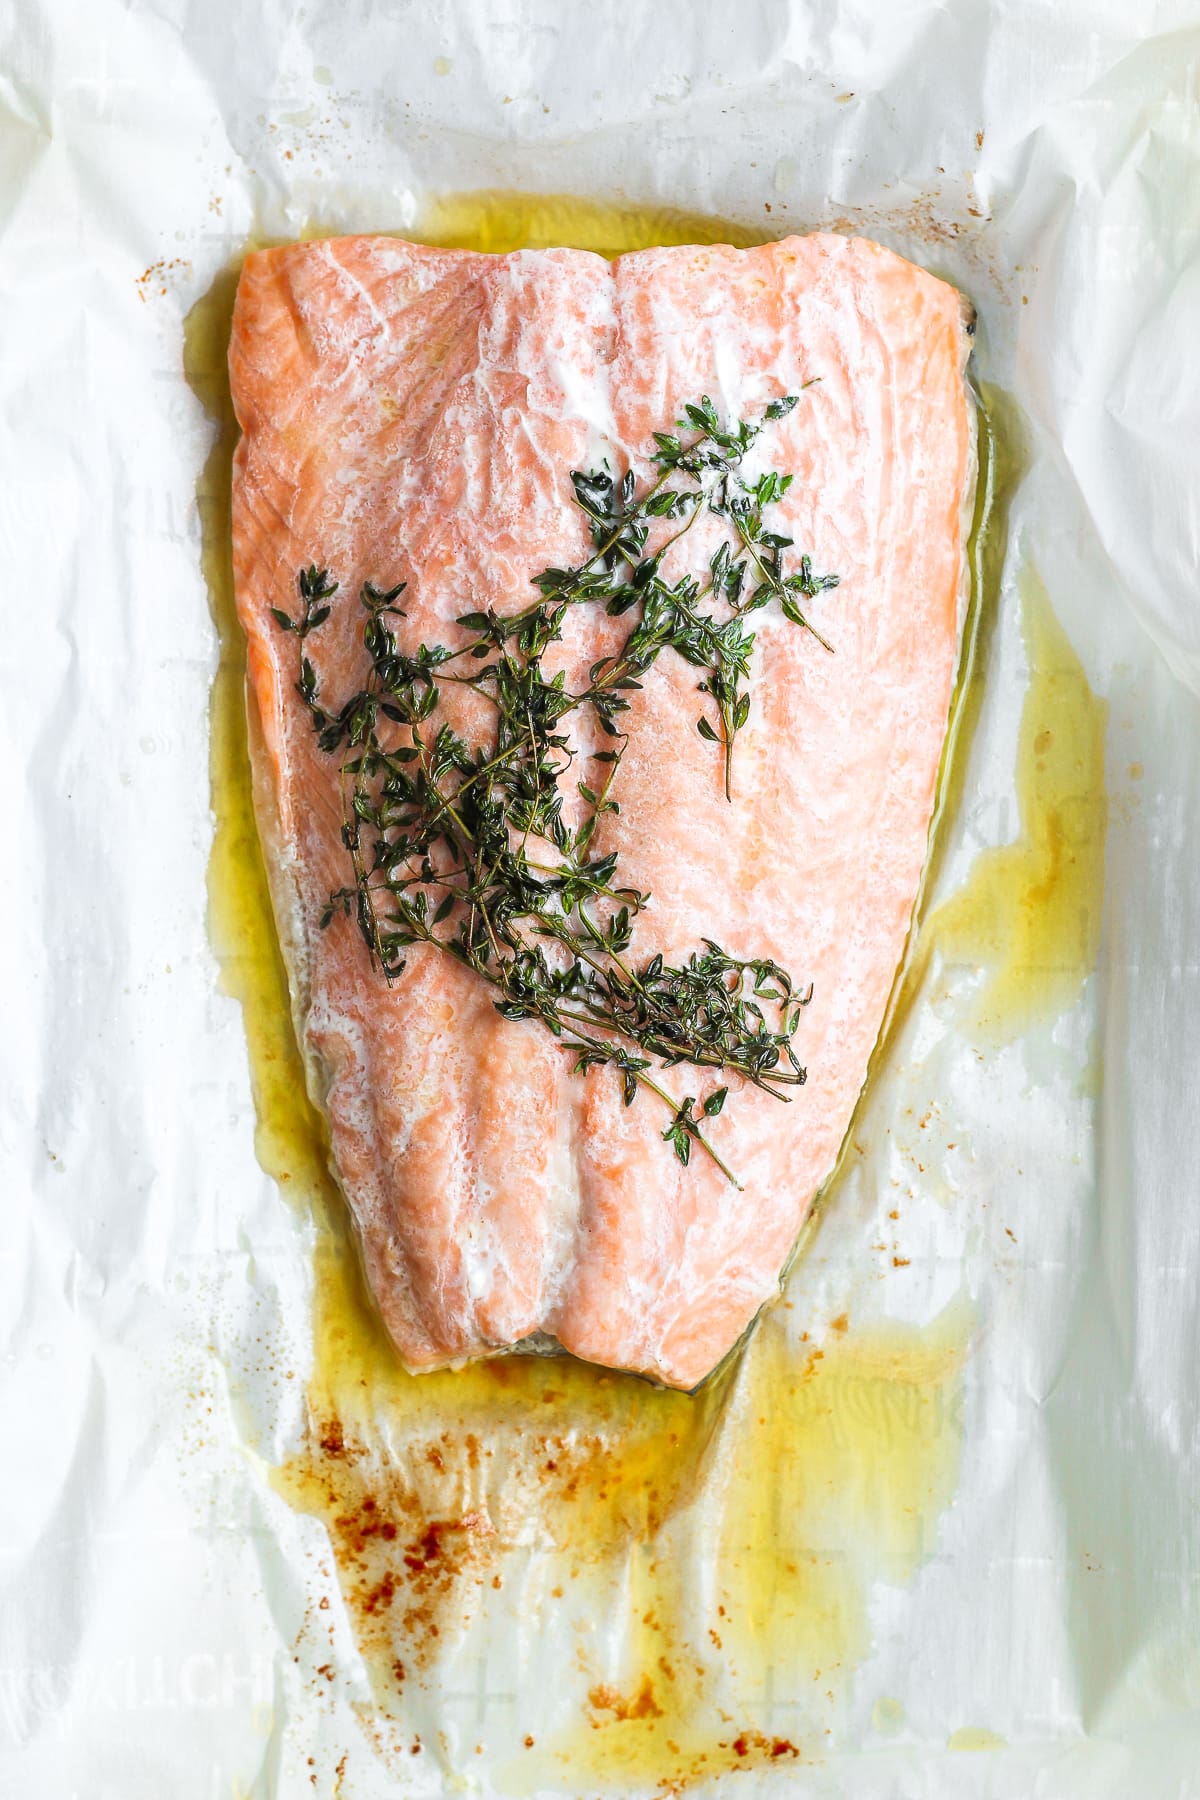 Easy Weeknight Salmon - a quick and delicious meal for any night of the week! #whole30 #paleo